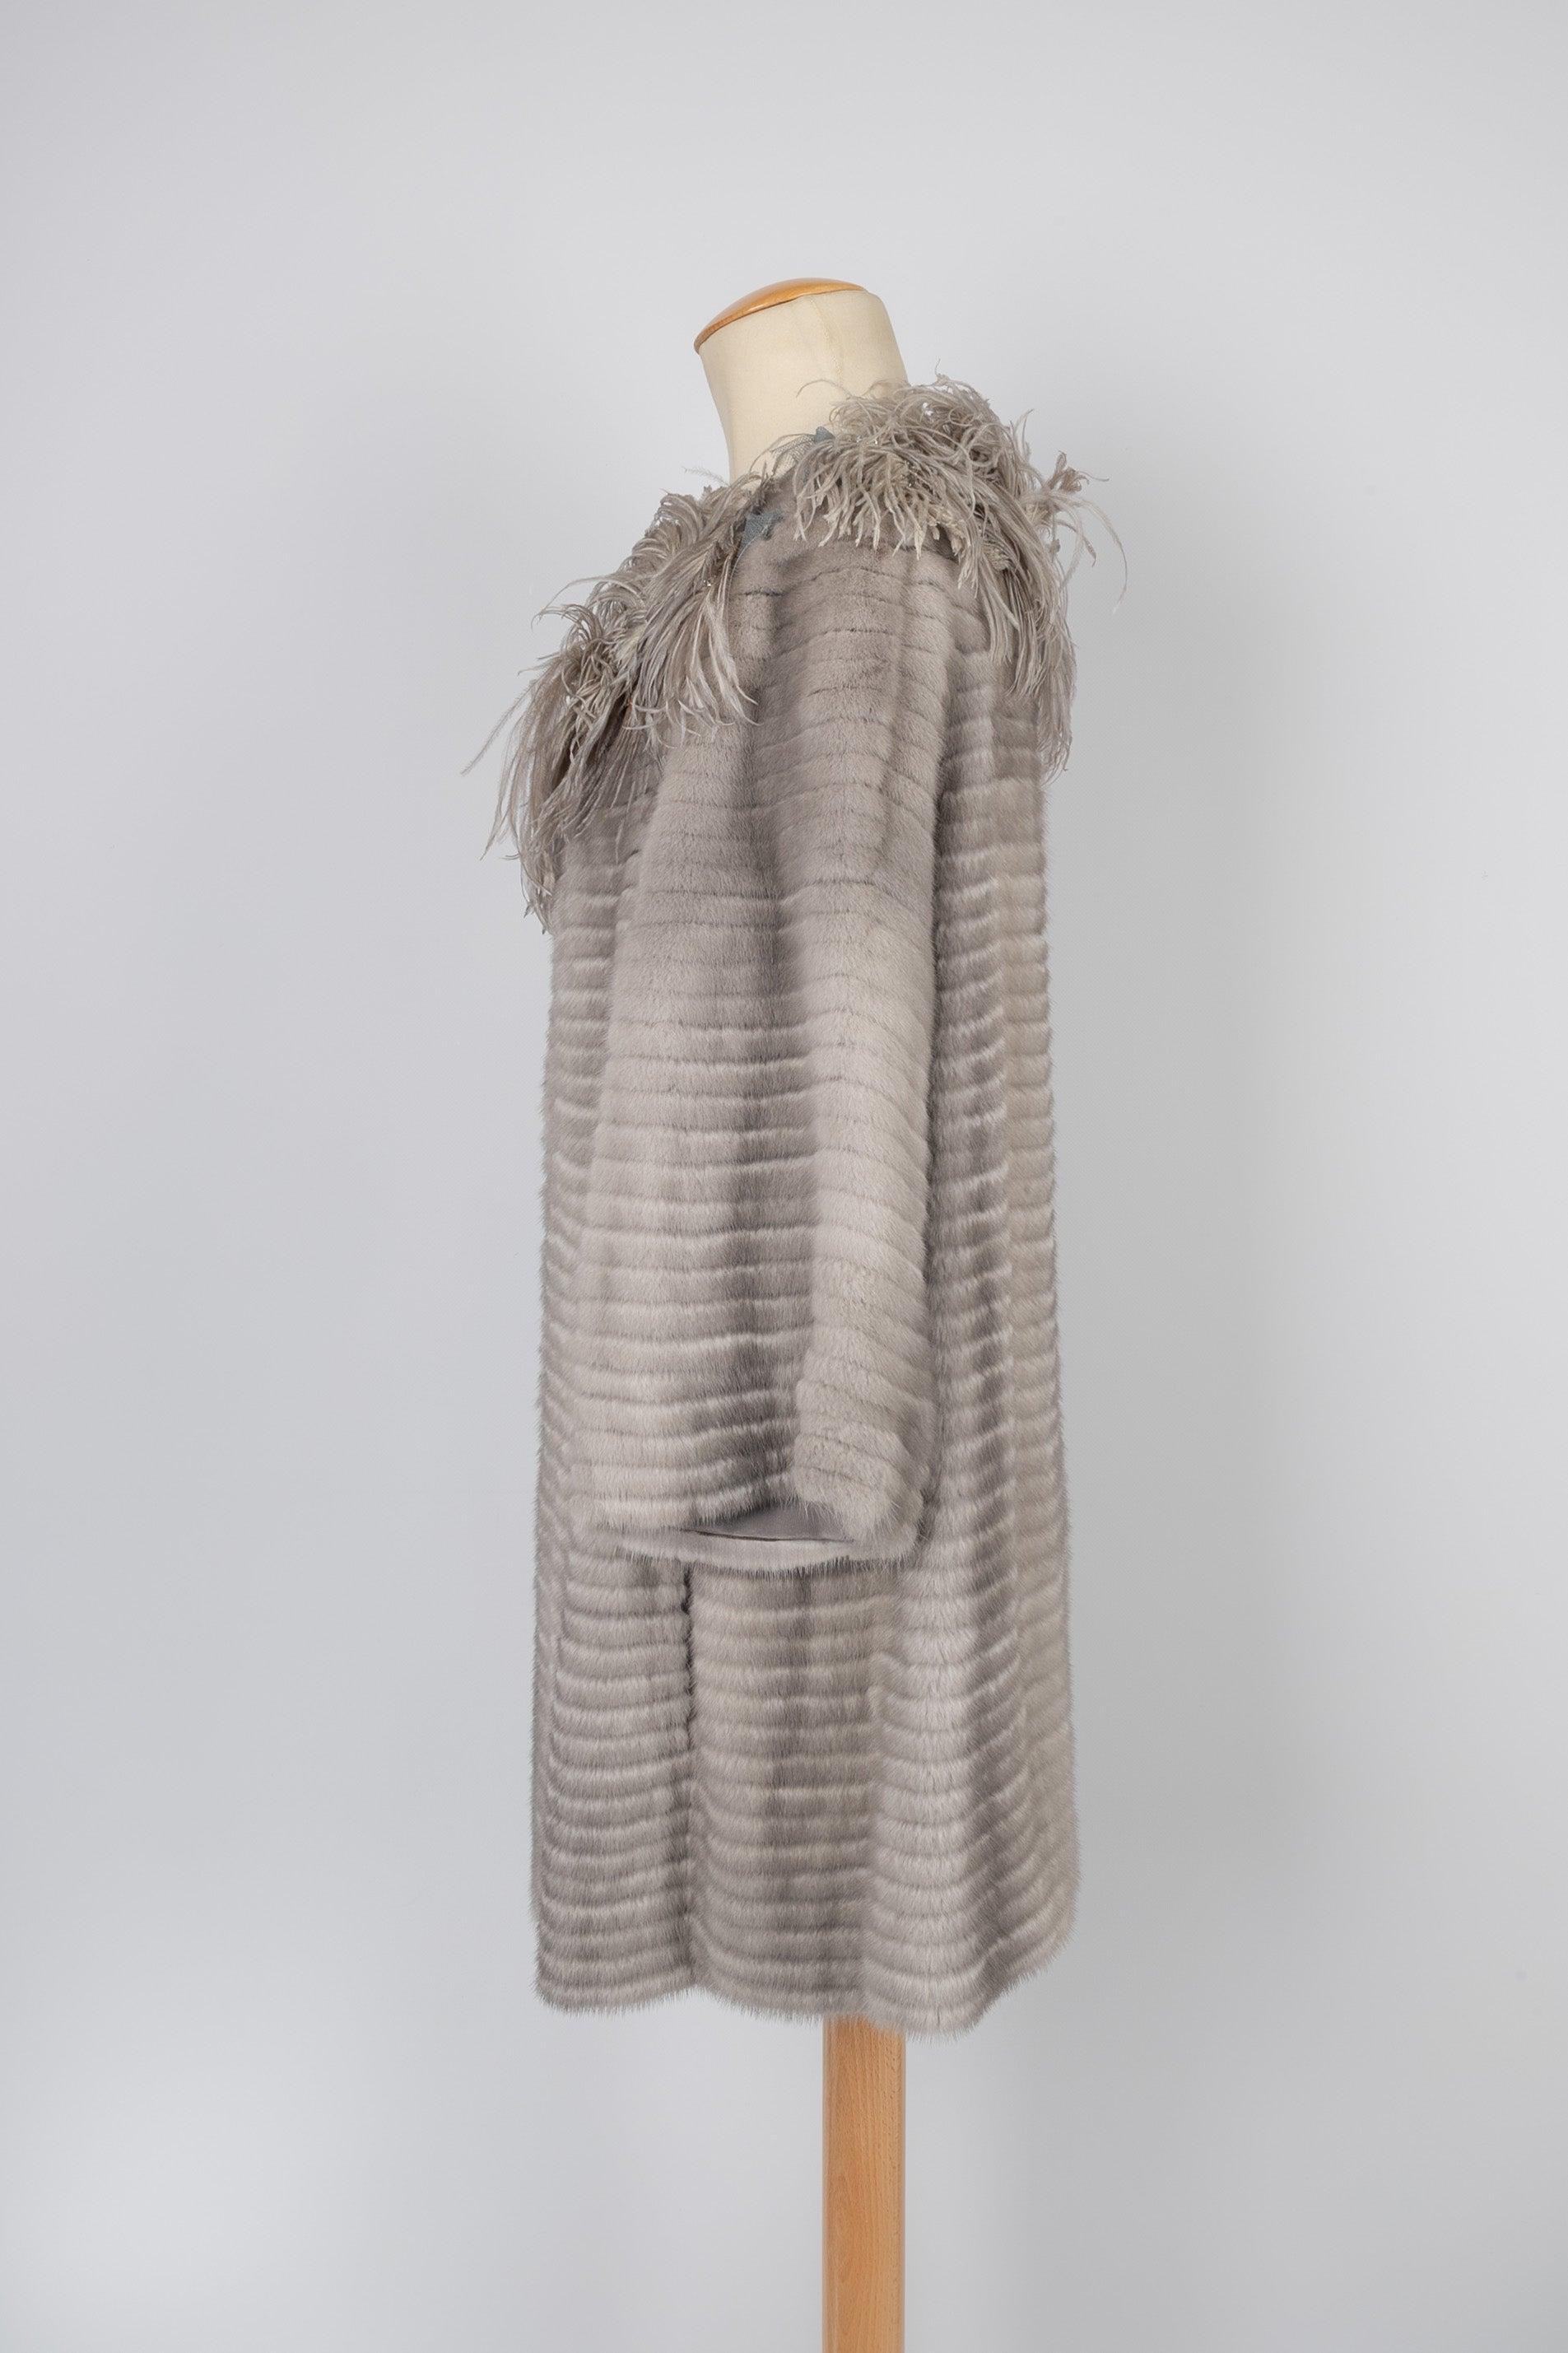 Dior - (Made in France) Pearl grey thin-rib mink coat. Ostrich feather collar. 38FR Size. 2010 Fall-Winter Ready-to-Wear Collection under the artistic direction of John Galliano.

Additional information:
Condition: Very good condition
Dimensions: